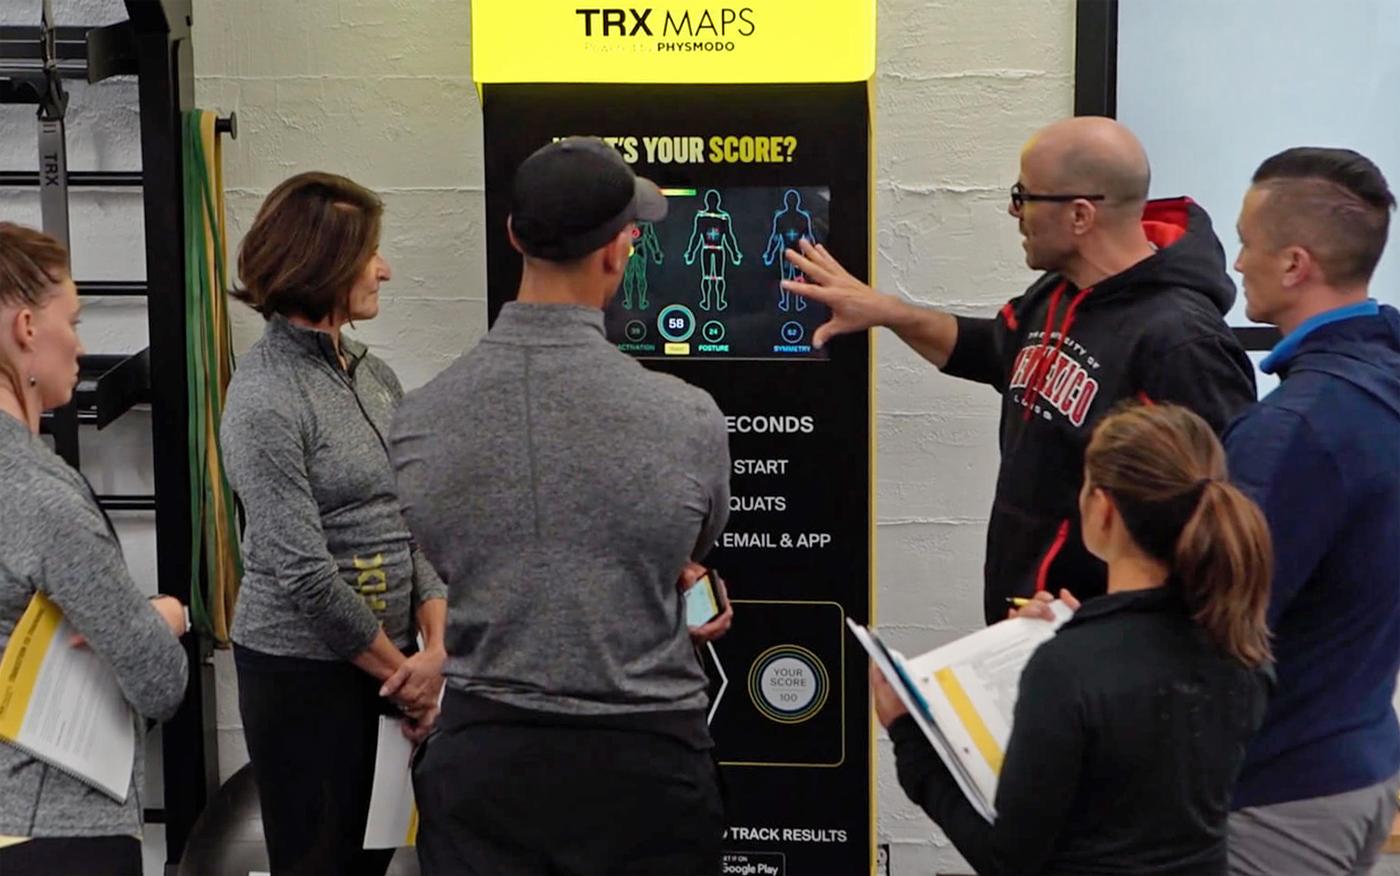 The technology can perform a total body movement assessment scan in under 30 seconds / TRX